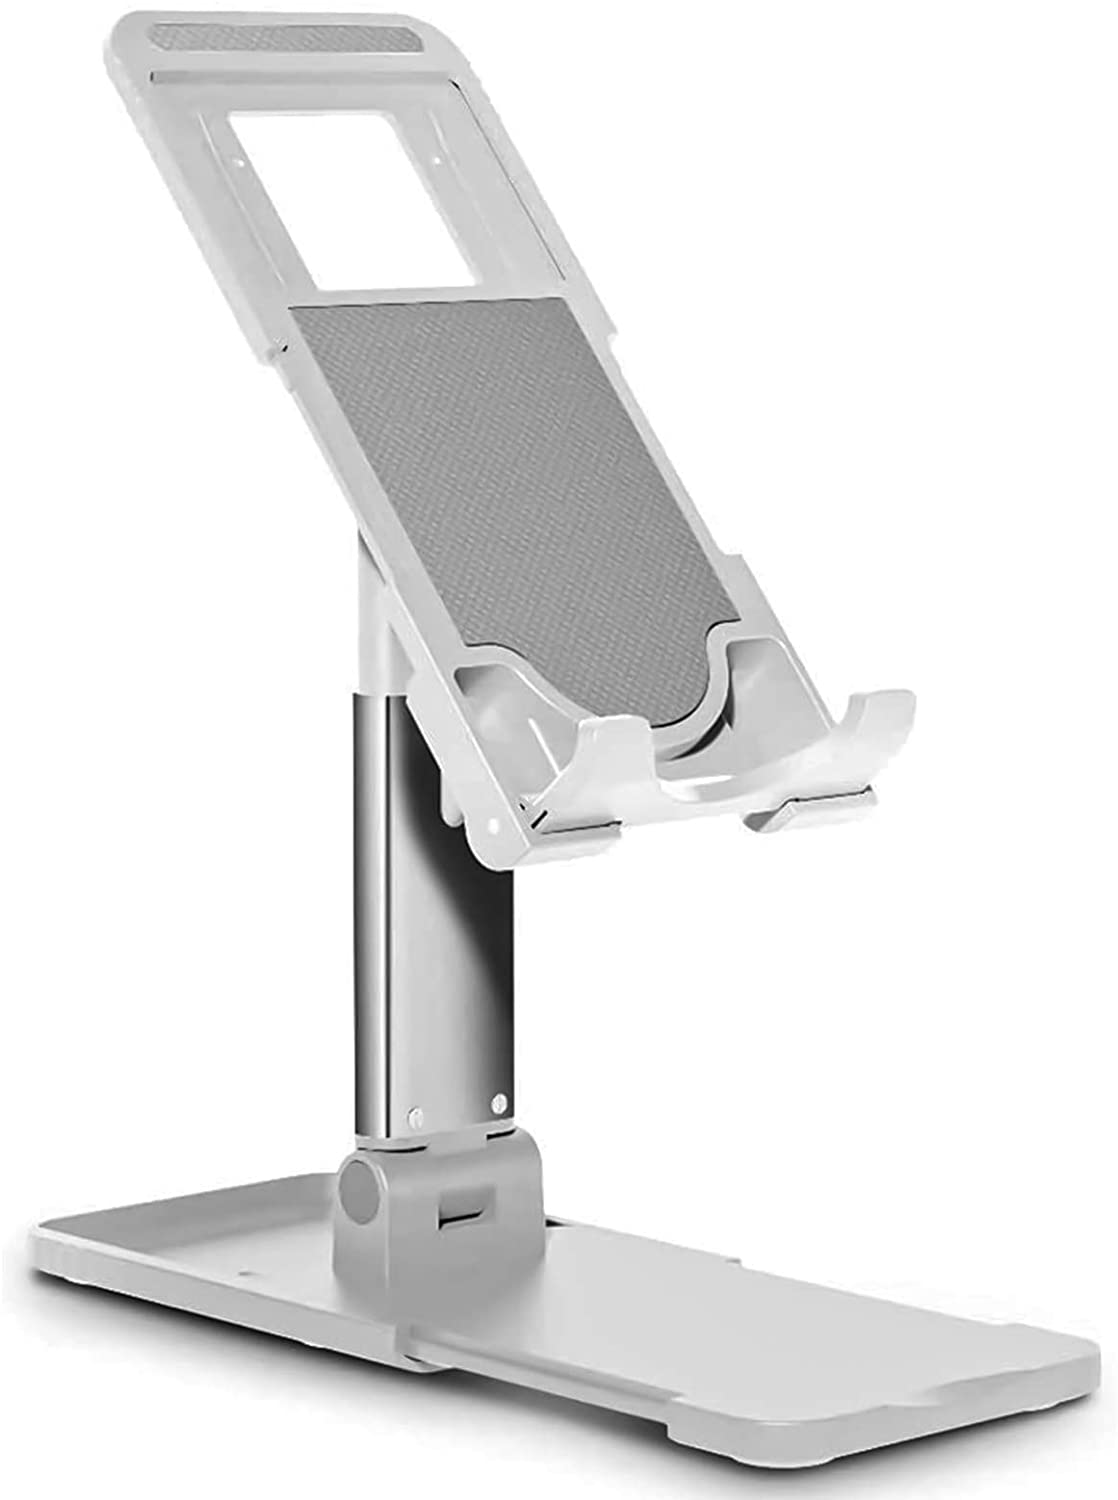 ''Universal Heavy Duty Desktop Tabletop CELL PHONE, iPad, Tablet Lifting Bracket with Foldable''''''''''